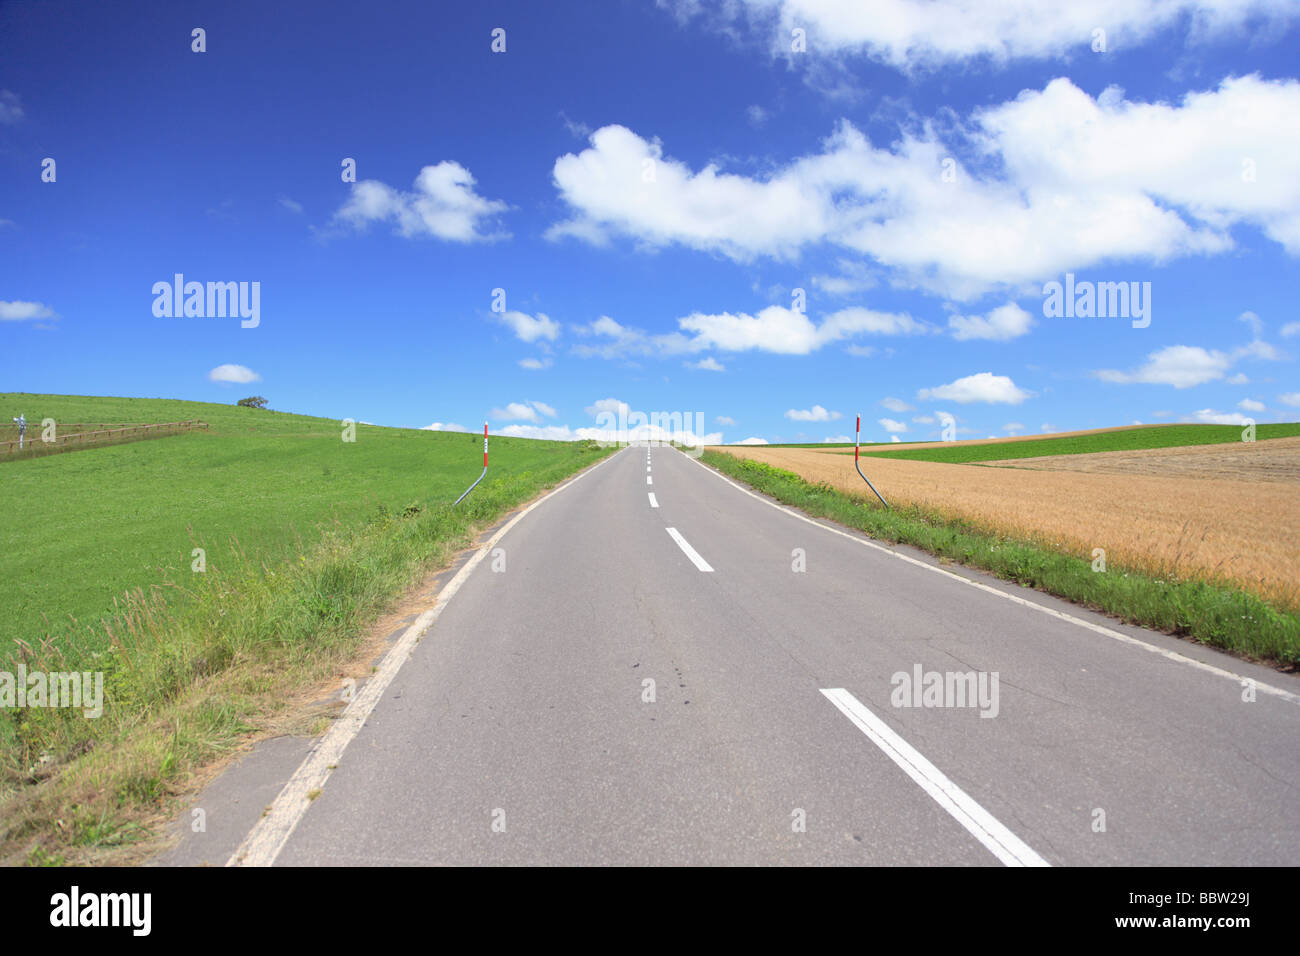 Long empty road with grassland against cloudy sky Stock Photo